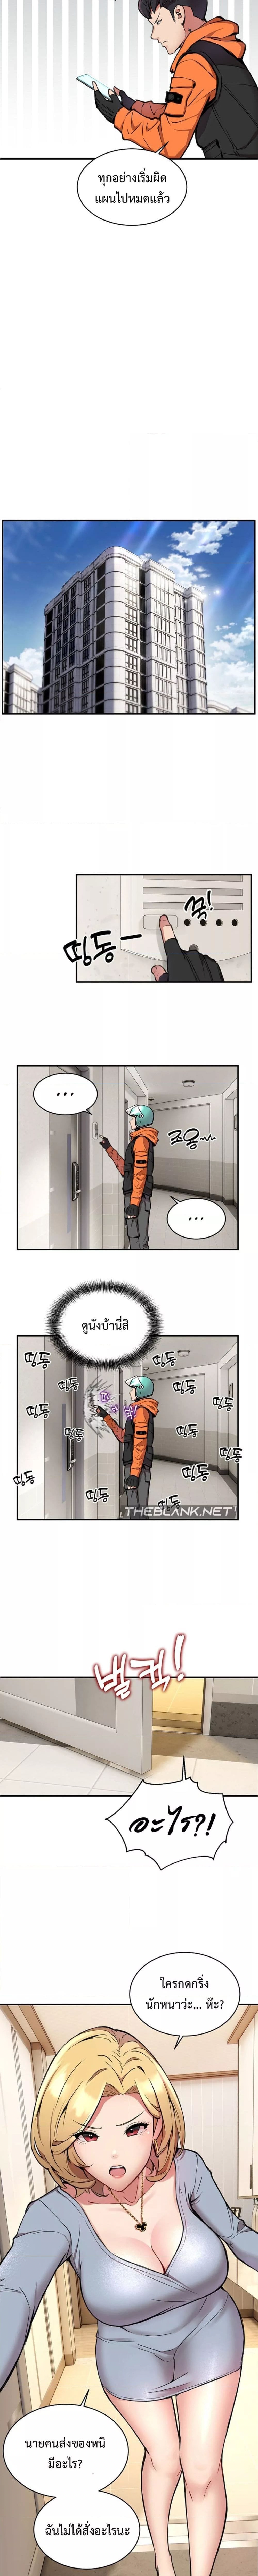 Driver in the New City ตอนที่ 2 ภาพ 3